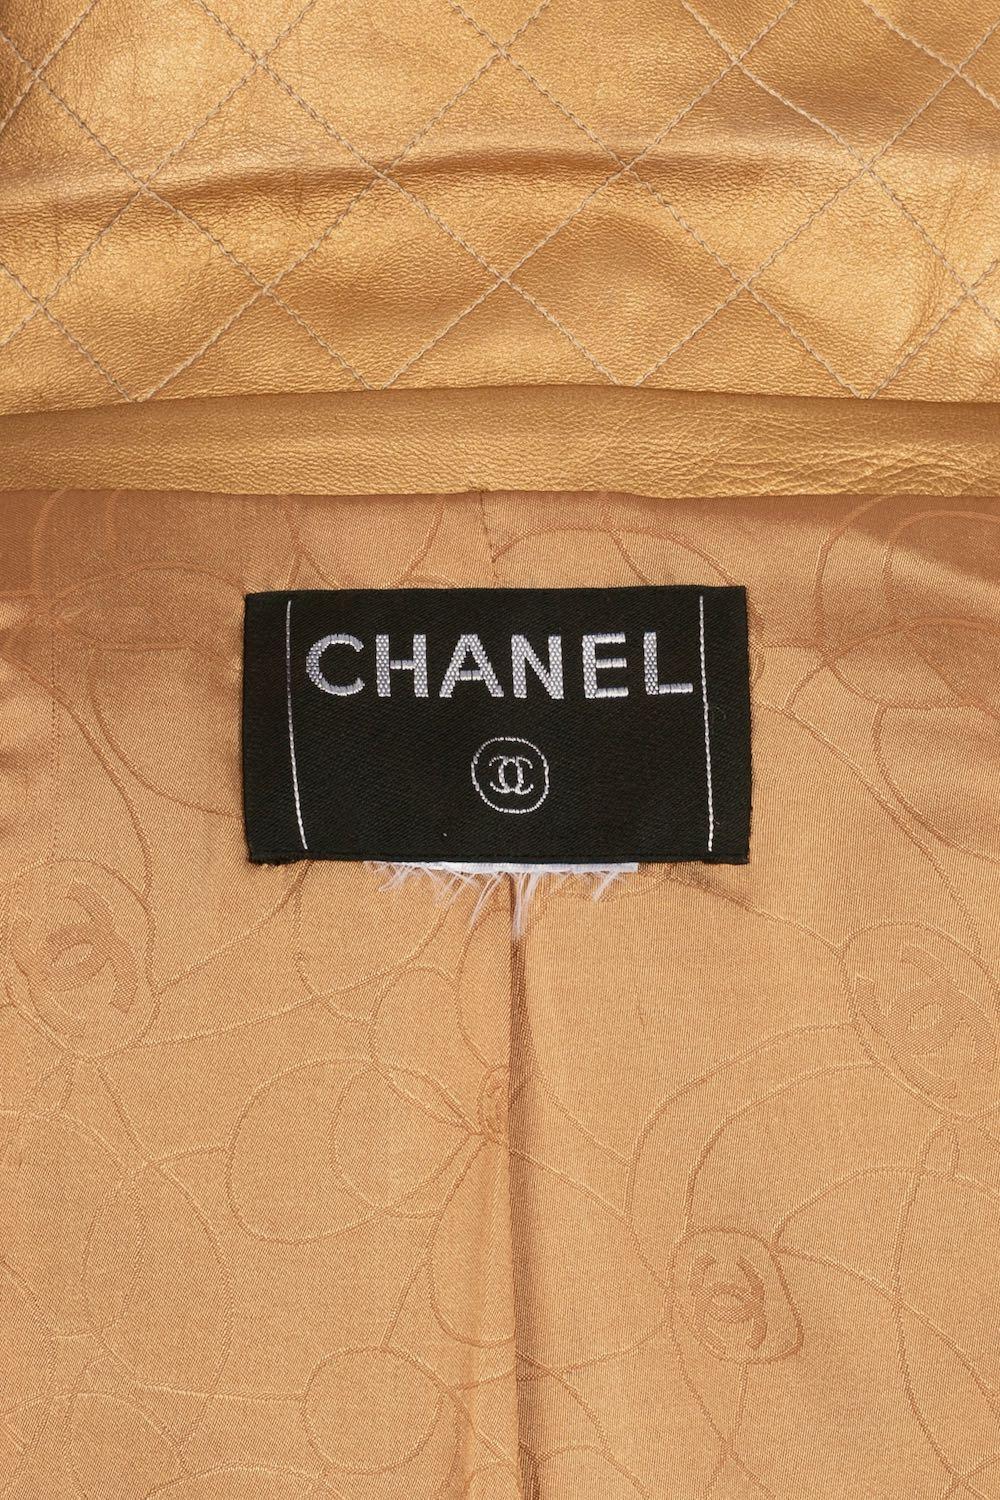 Chanel Bronze Lamb Leather Jacket with Silk Lining 4